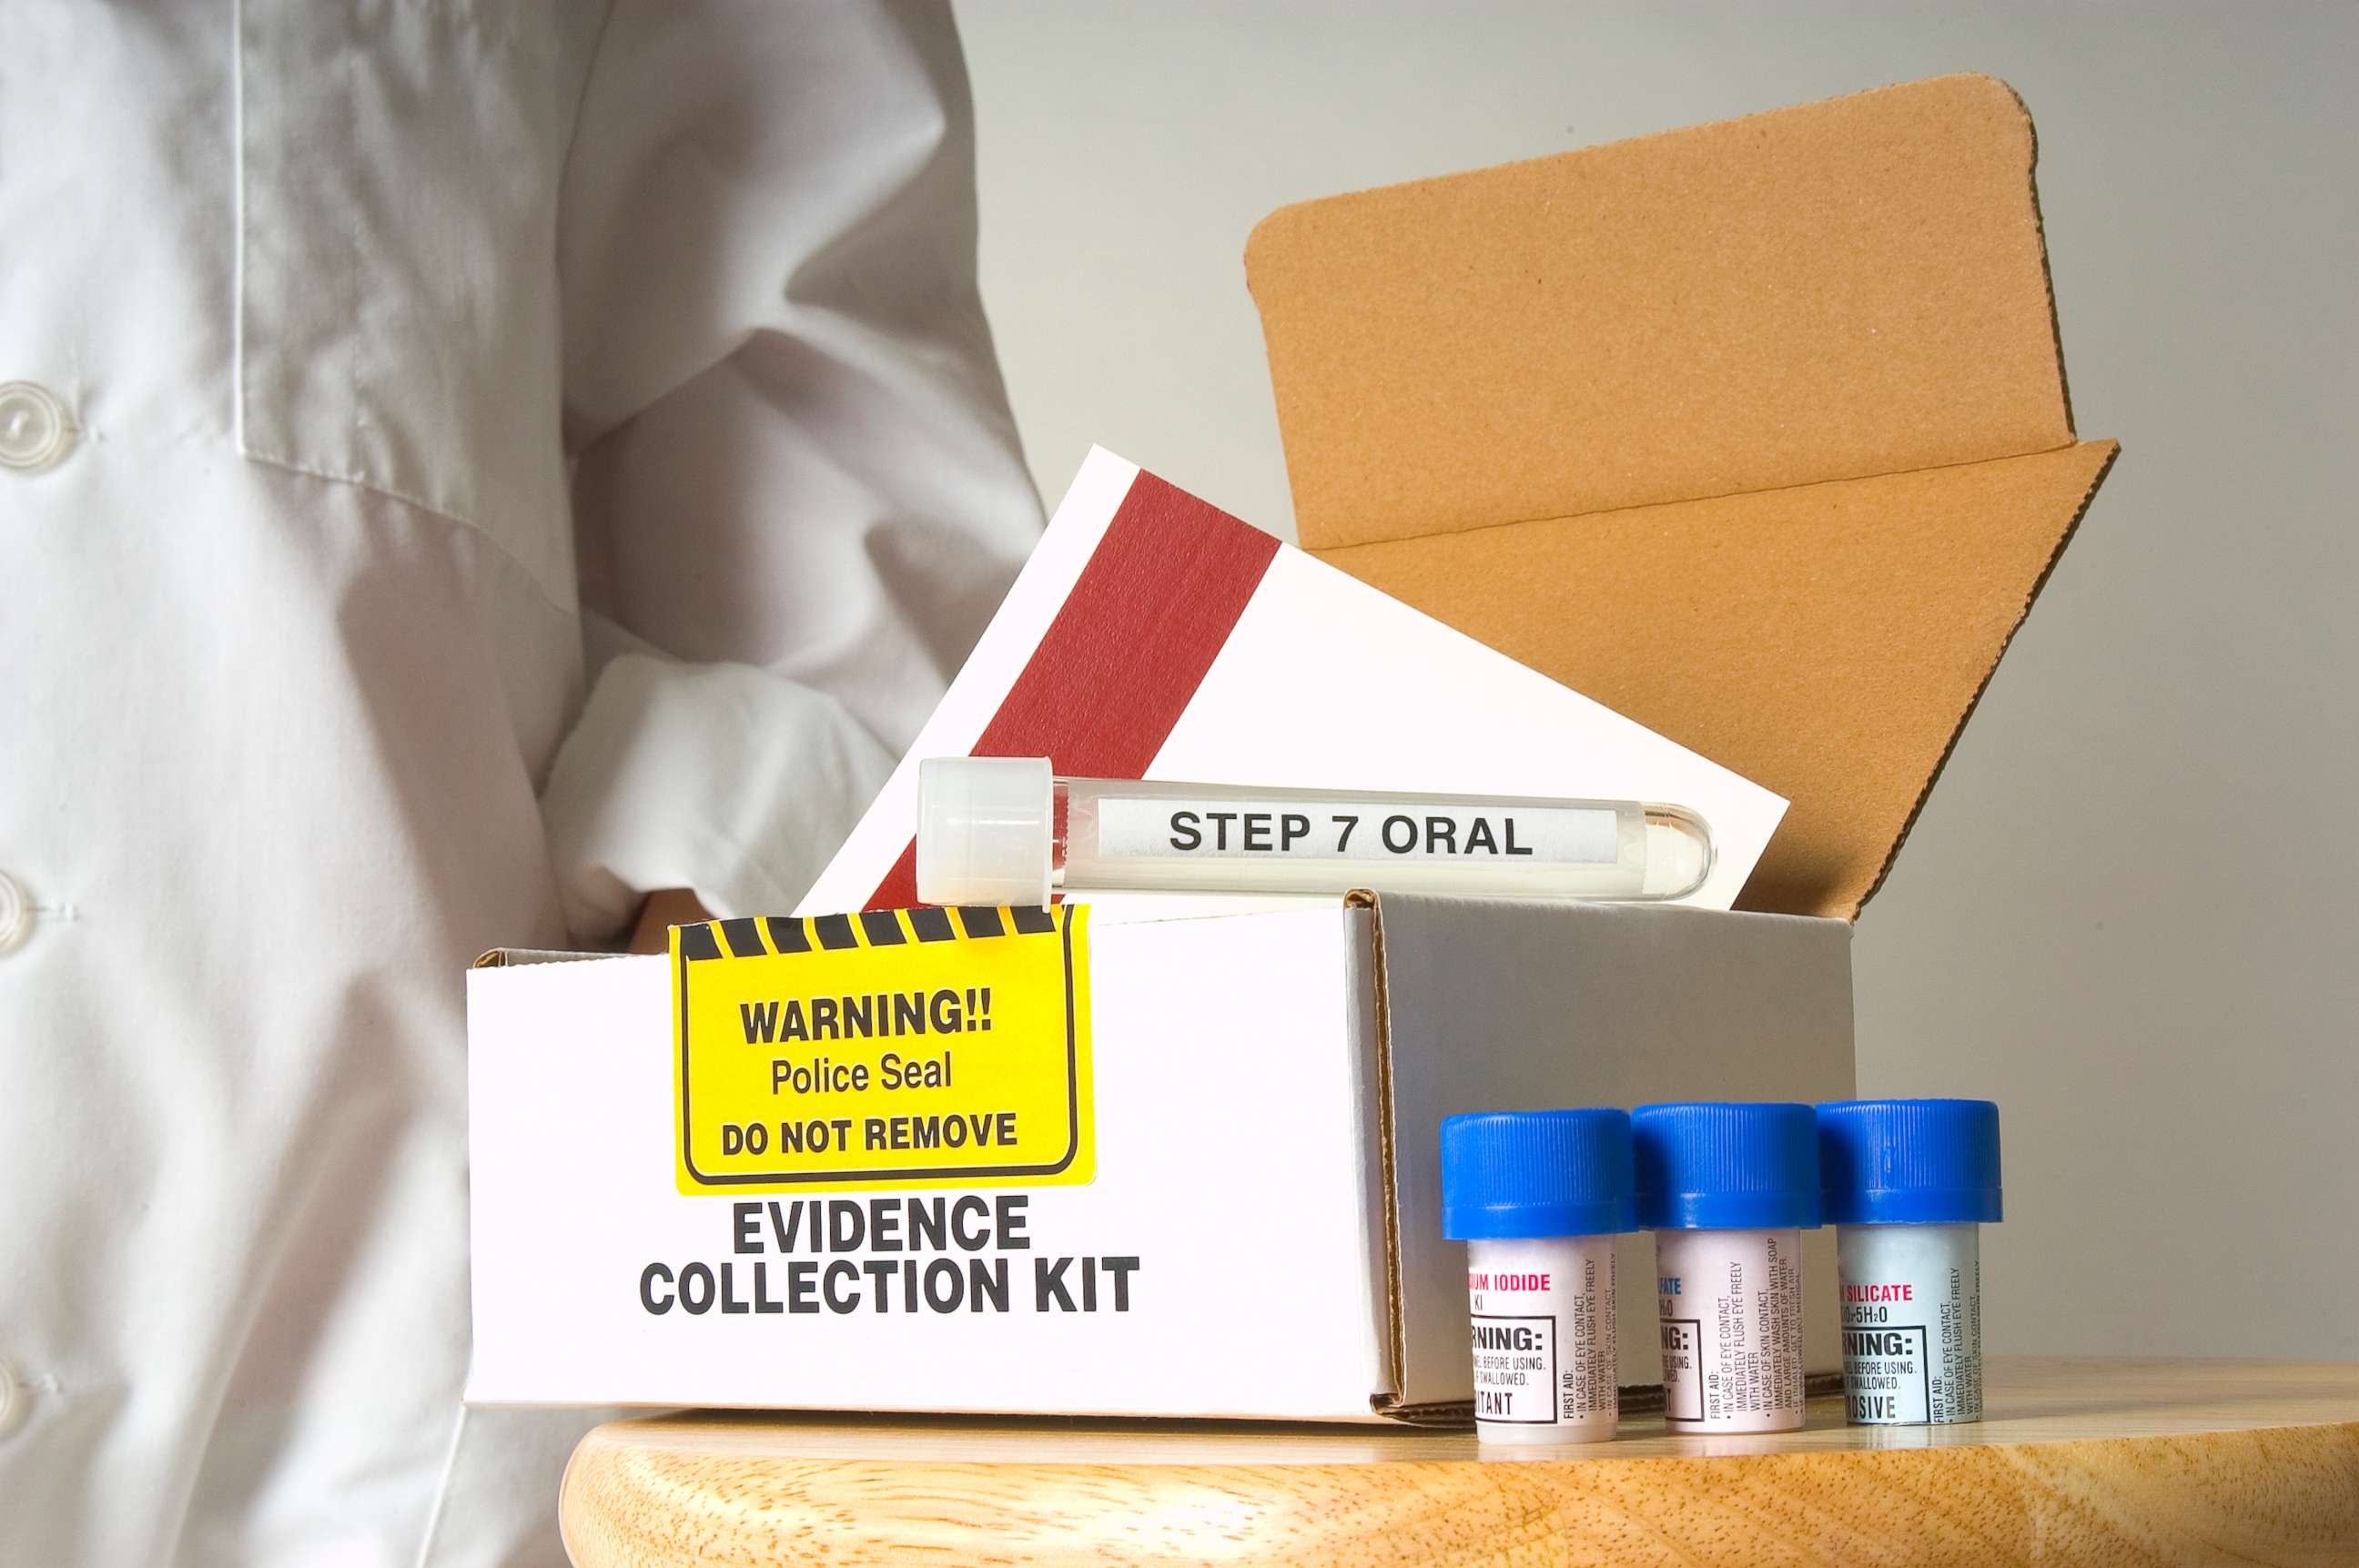 PHOTO: In this stock photo an evidence collection kit used for rapes is pictured.